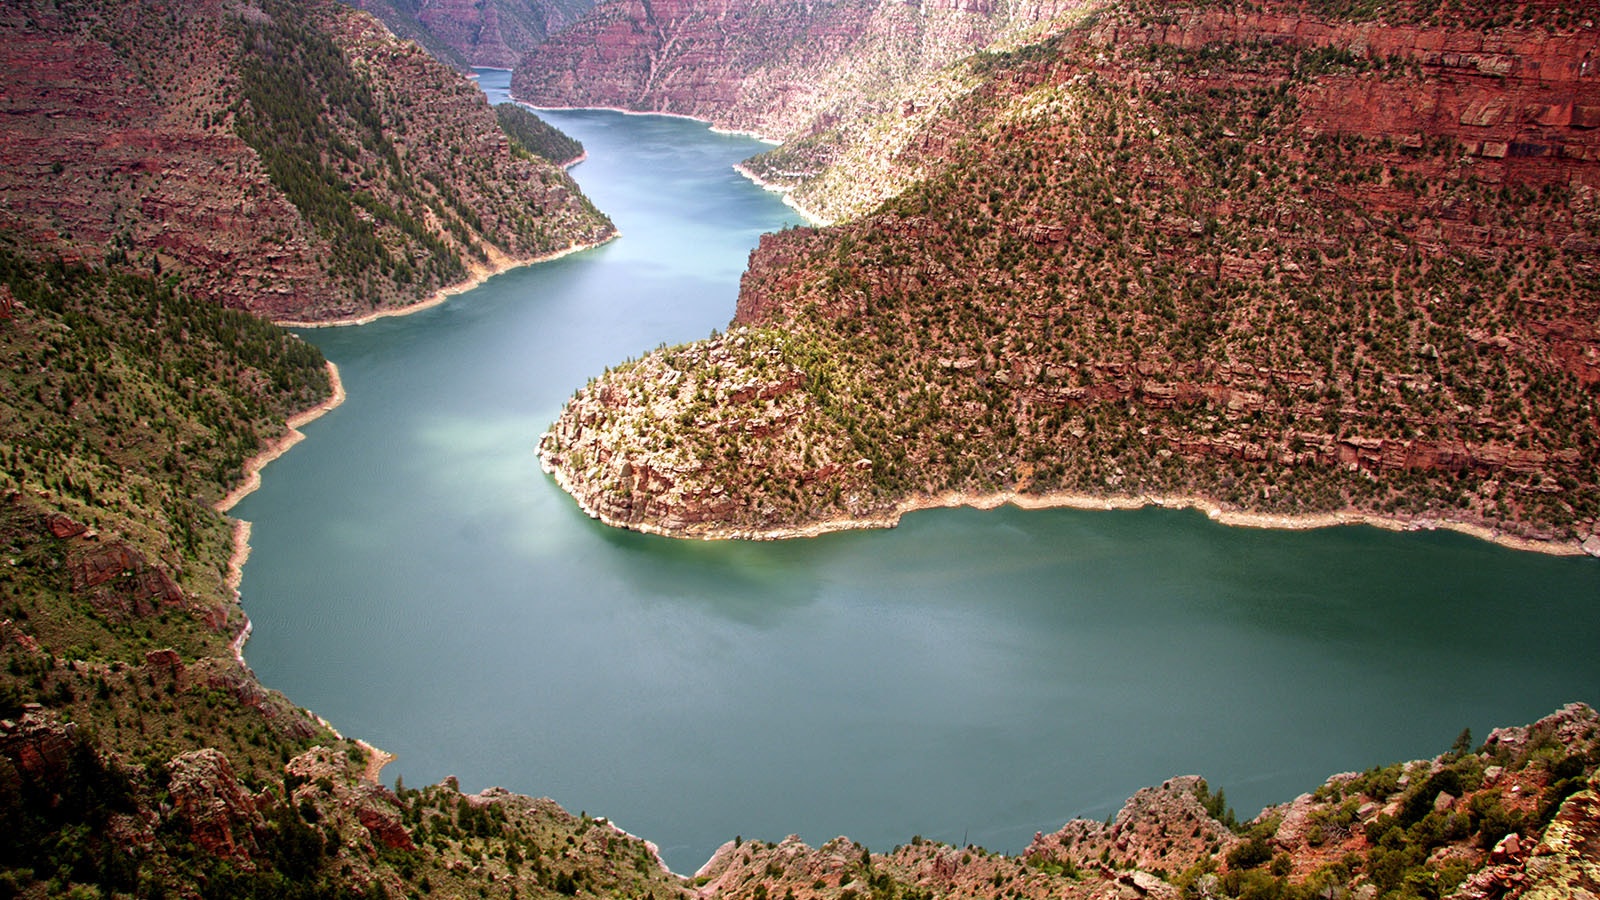 Flaming Gorge Reservoir was created when the Green River was dammed 60 years ago.